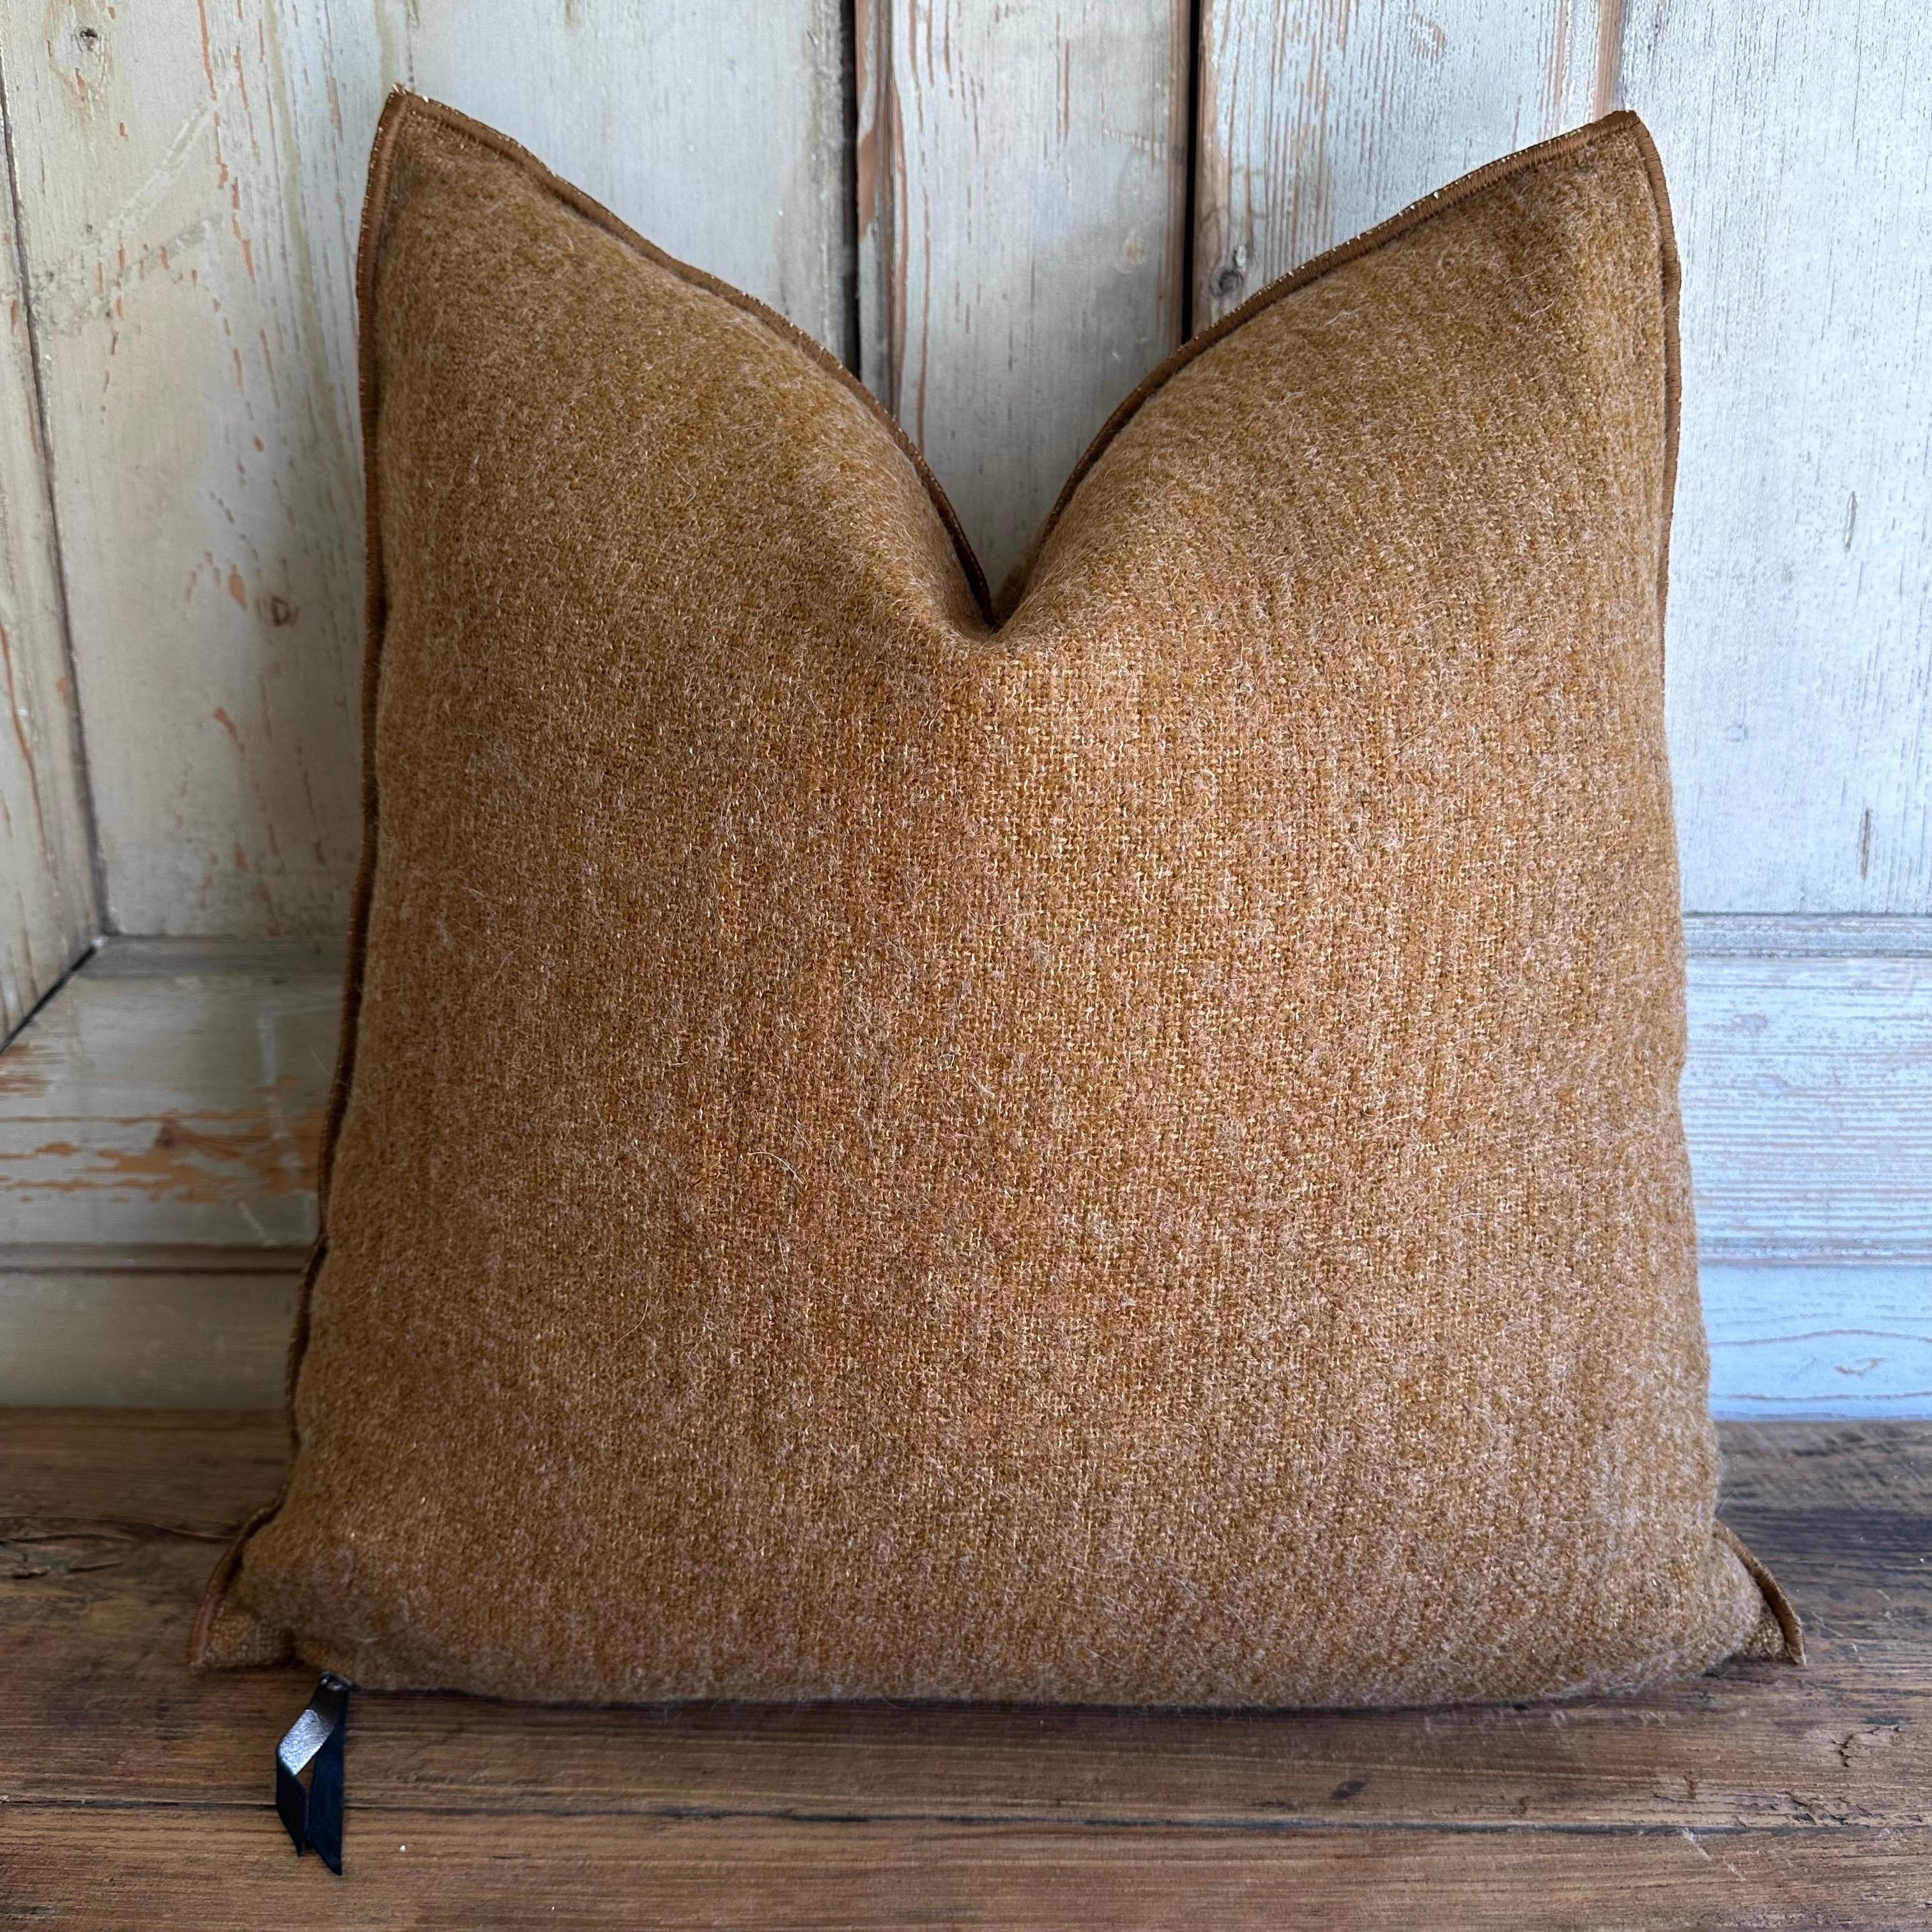 Custom wool blend accent pillow with down insert. 
Color:Havane which is a deep rust with warm brown tones, nubby boucle style pillow with a stitched edge, metal zipper closure. 
Size: 22”x22”.
Our pillows are constructed with vintage one of a